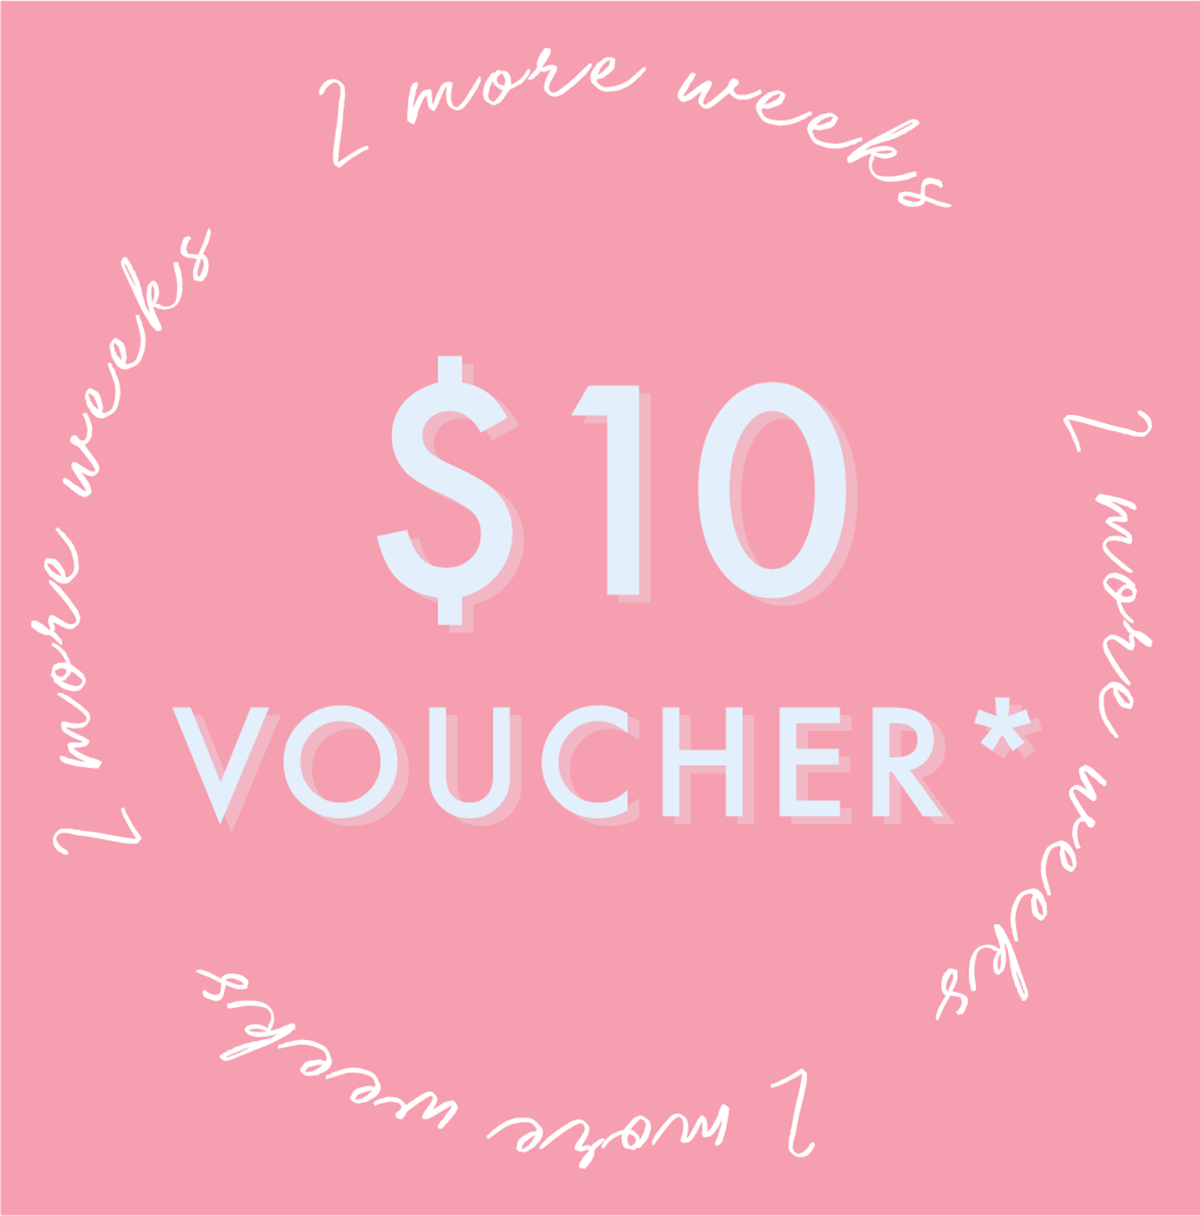 We have extended your $10 voucher. 